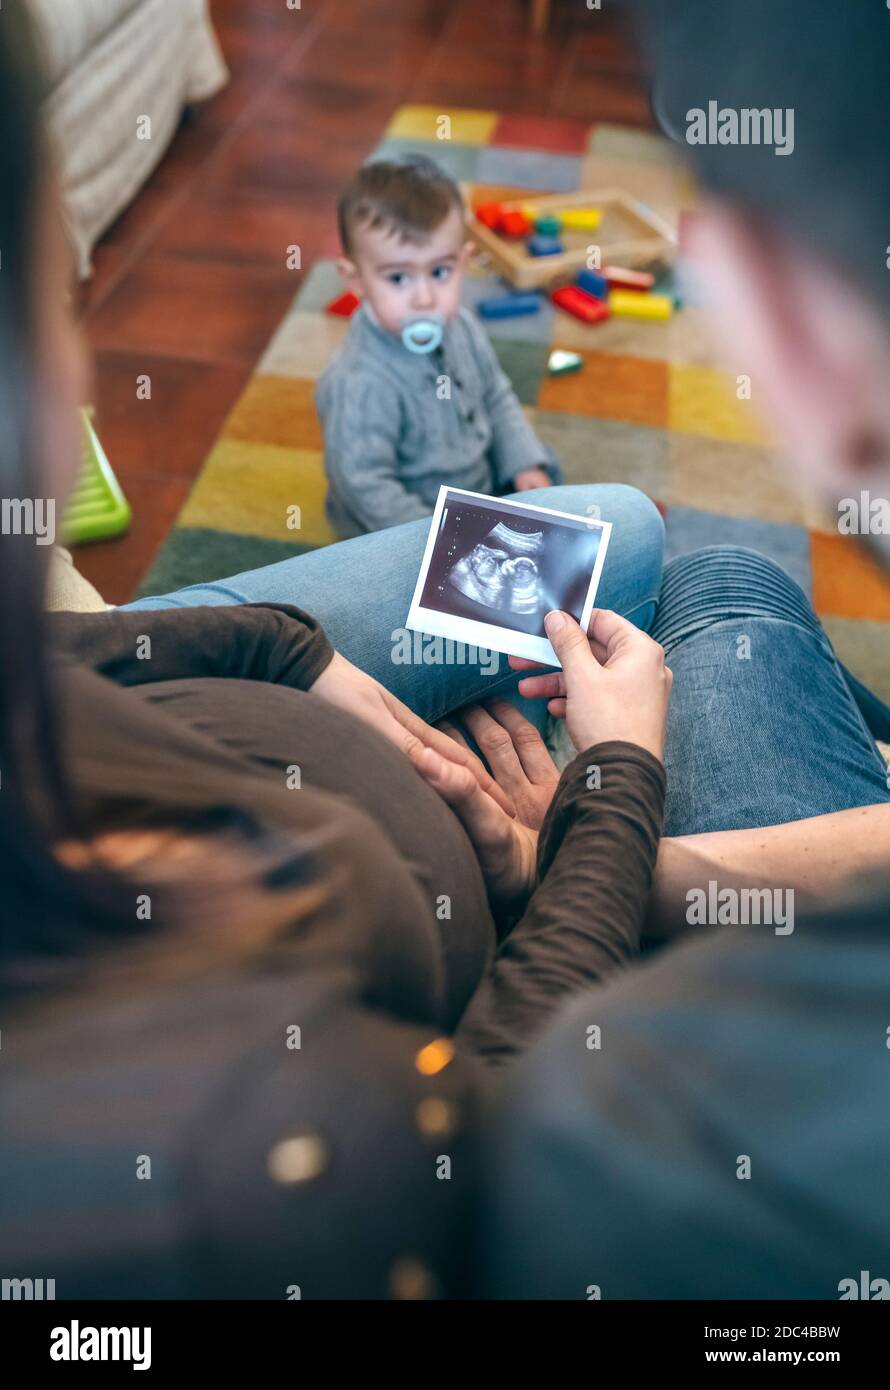 Parents looking ultrasound of their new baby Stock Photo